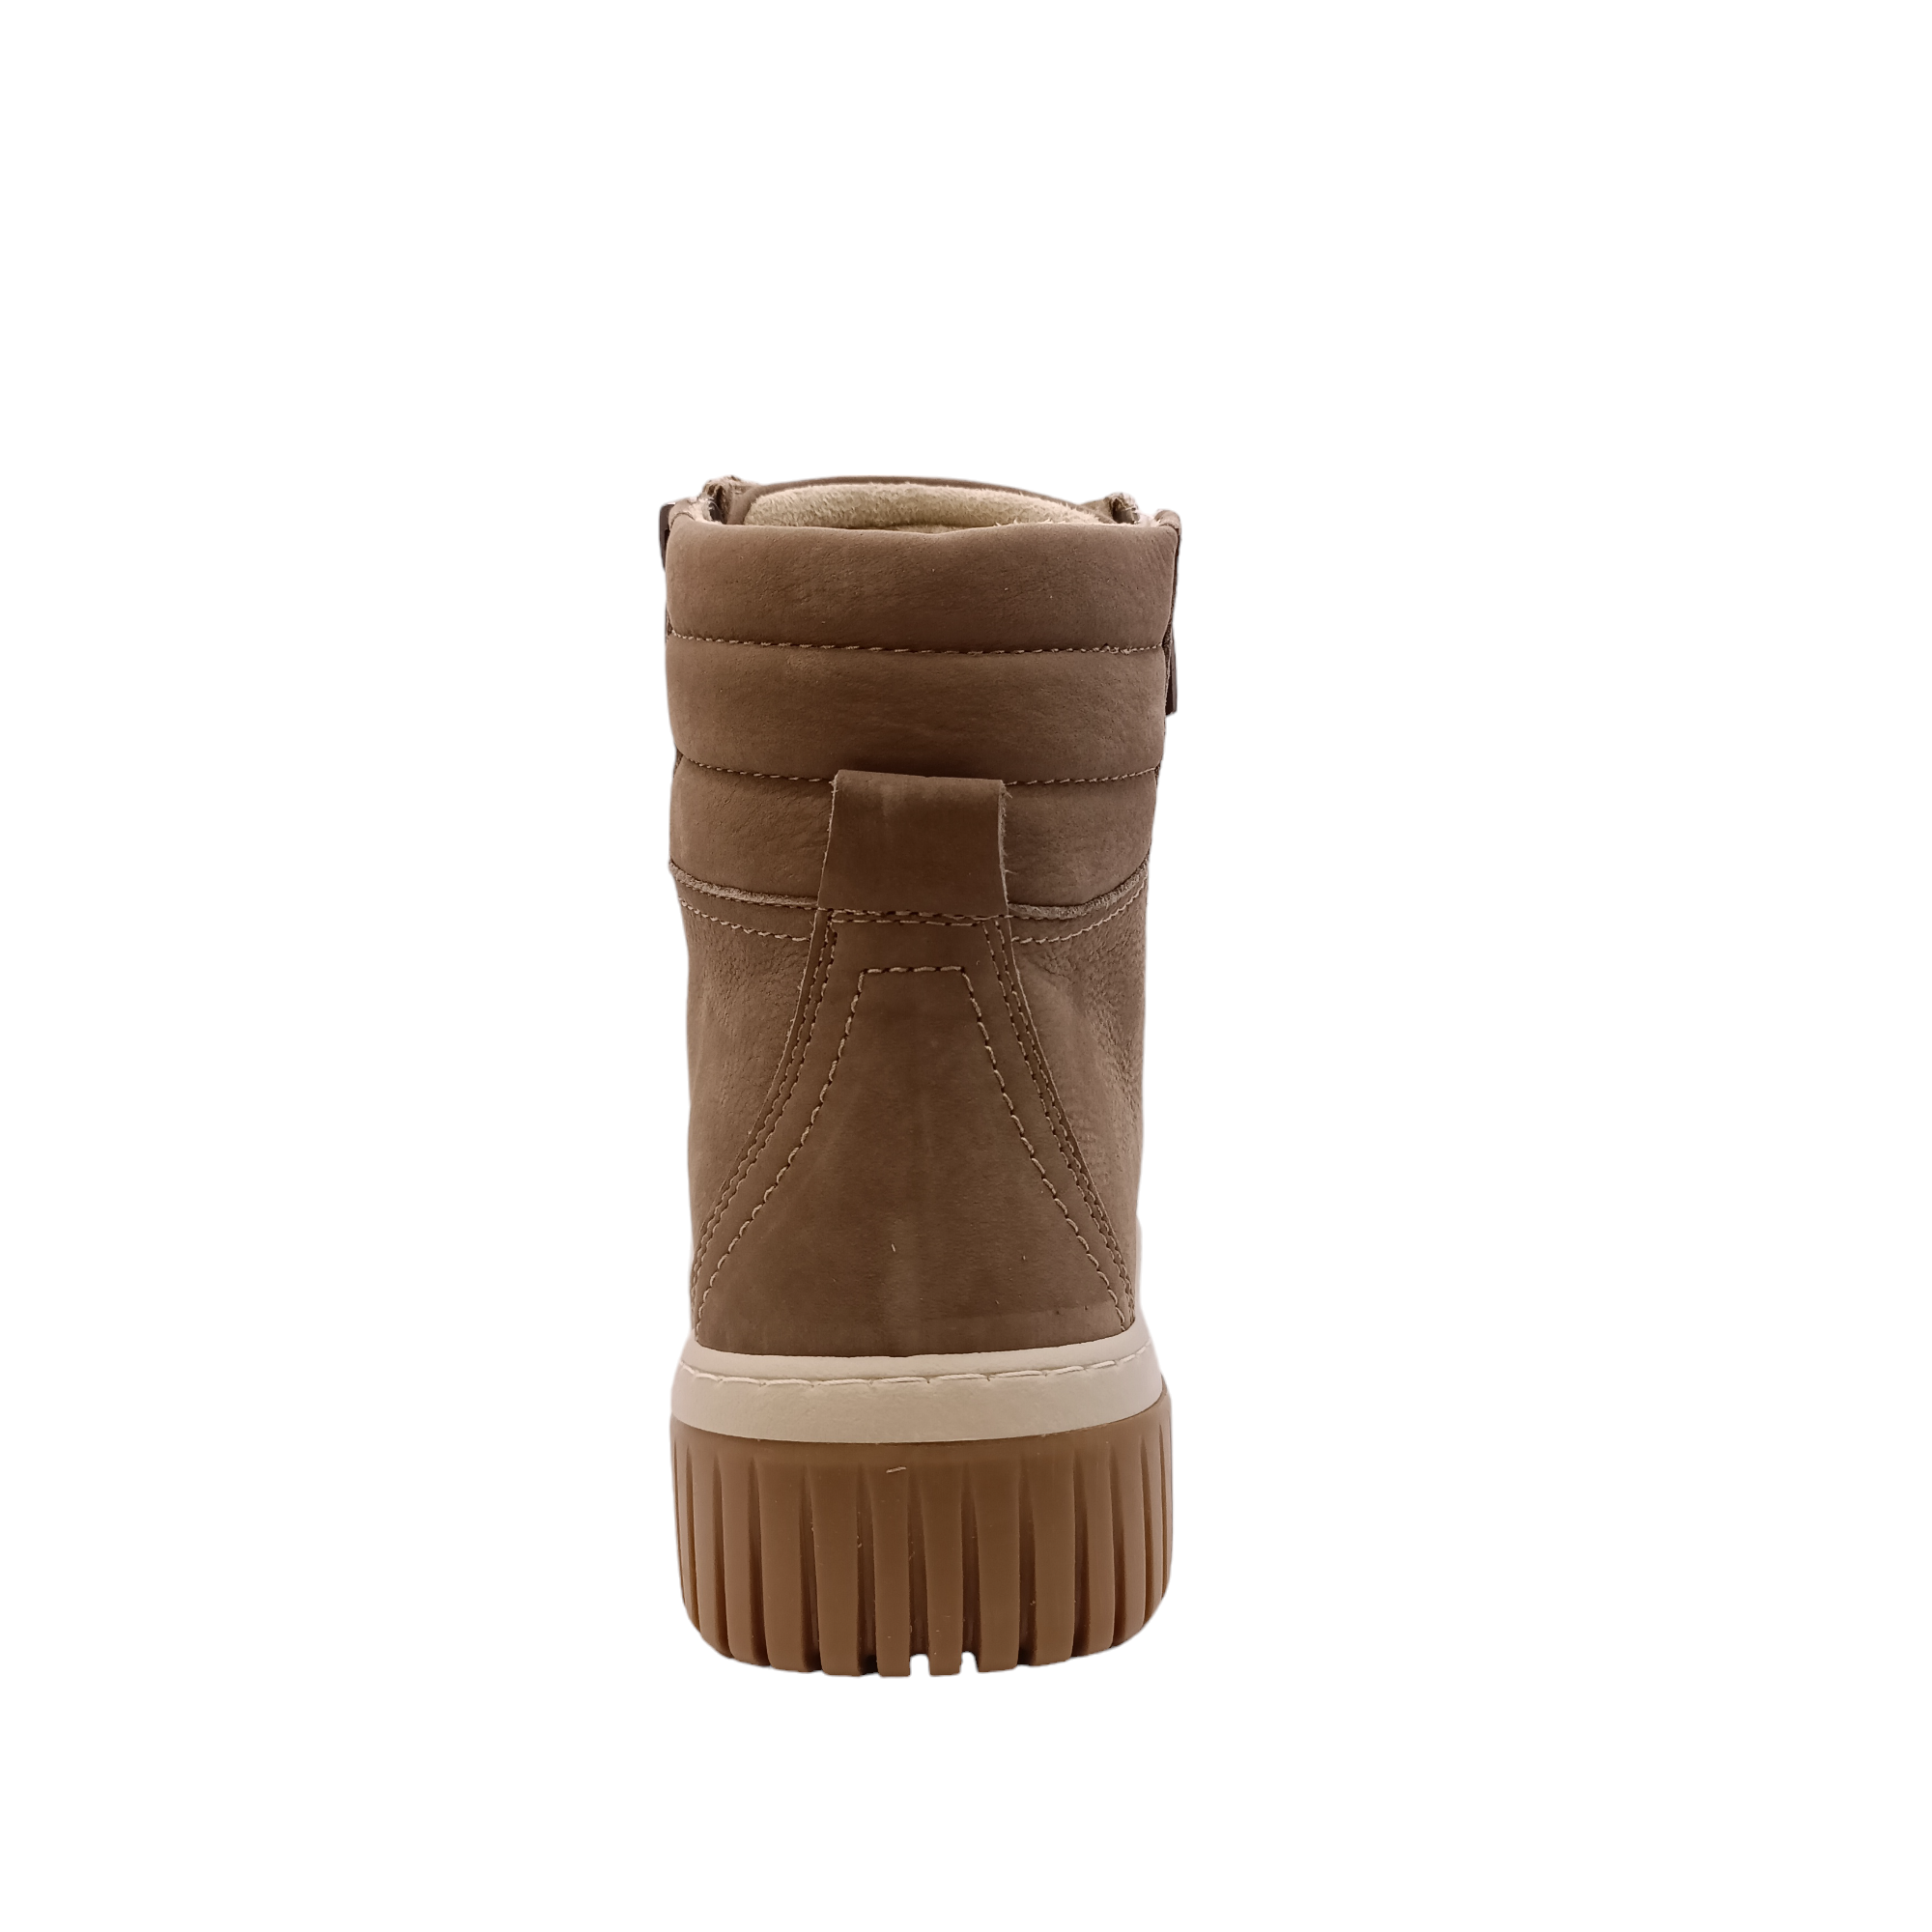 back view of the boot Petra from Cabello. Soft Turkish taupe coloured leather boot with side zip and light coloured sole and laces. Padded ankle with ruggered grip. Shop Womens Boots Online and In-store with shoe&me Mount Maunganui Tauranga NZ.